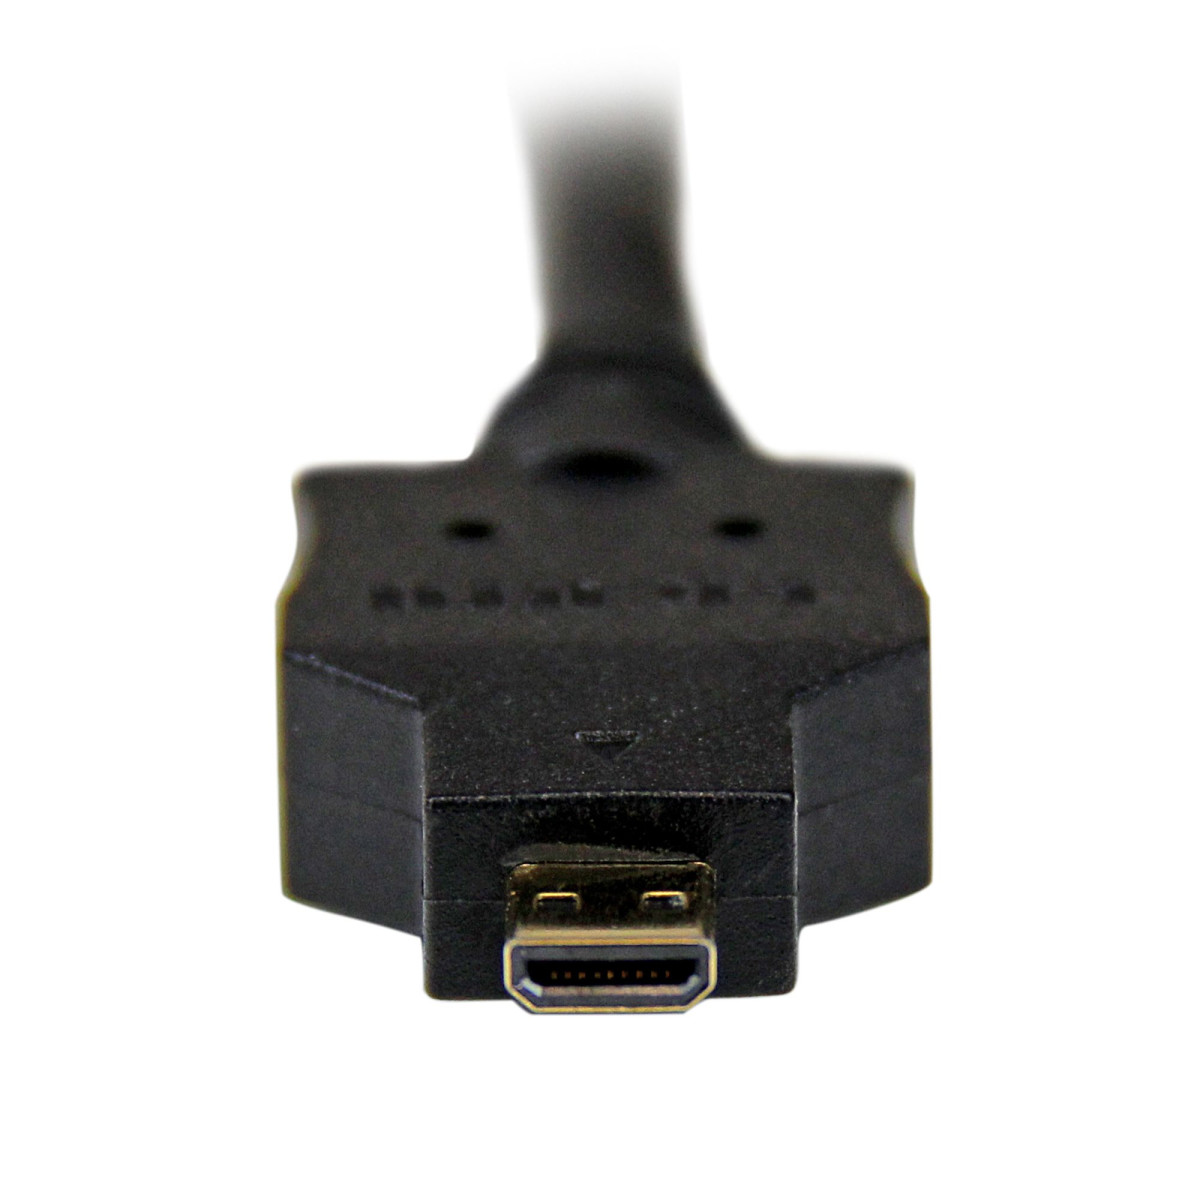 2m Micro HDMI to DVI-D Cable - M/M